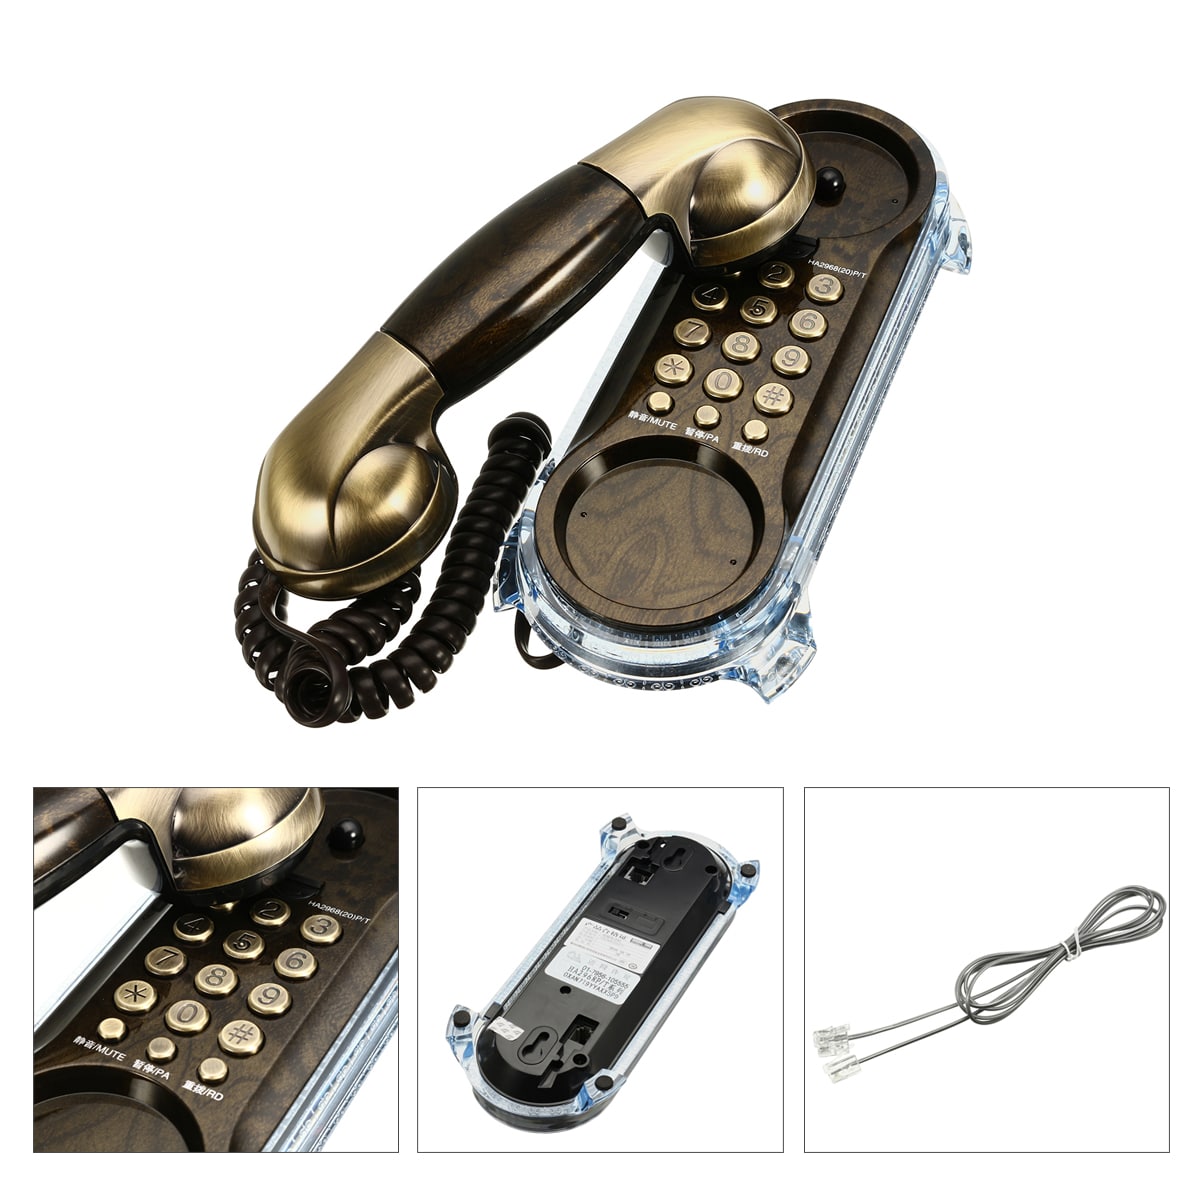 Advanced Telephones Wall Mountable Home Corded Phone, Phones For ...